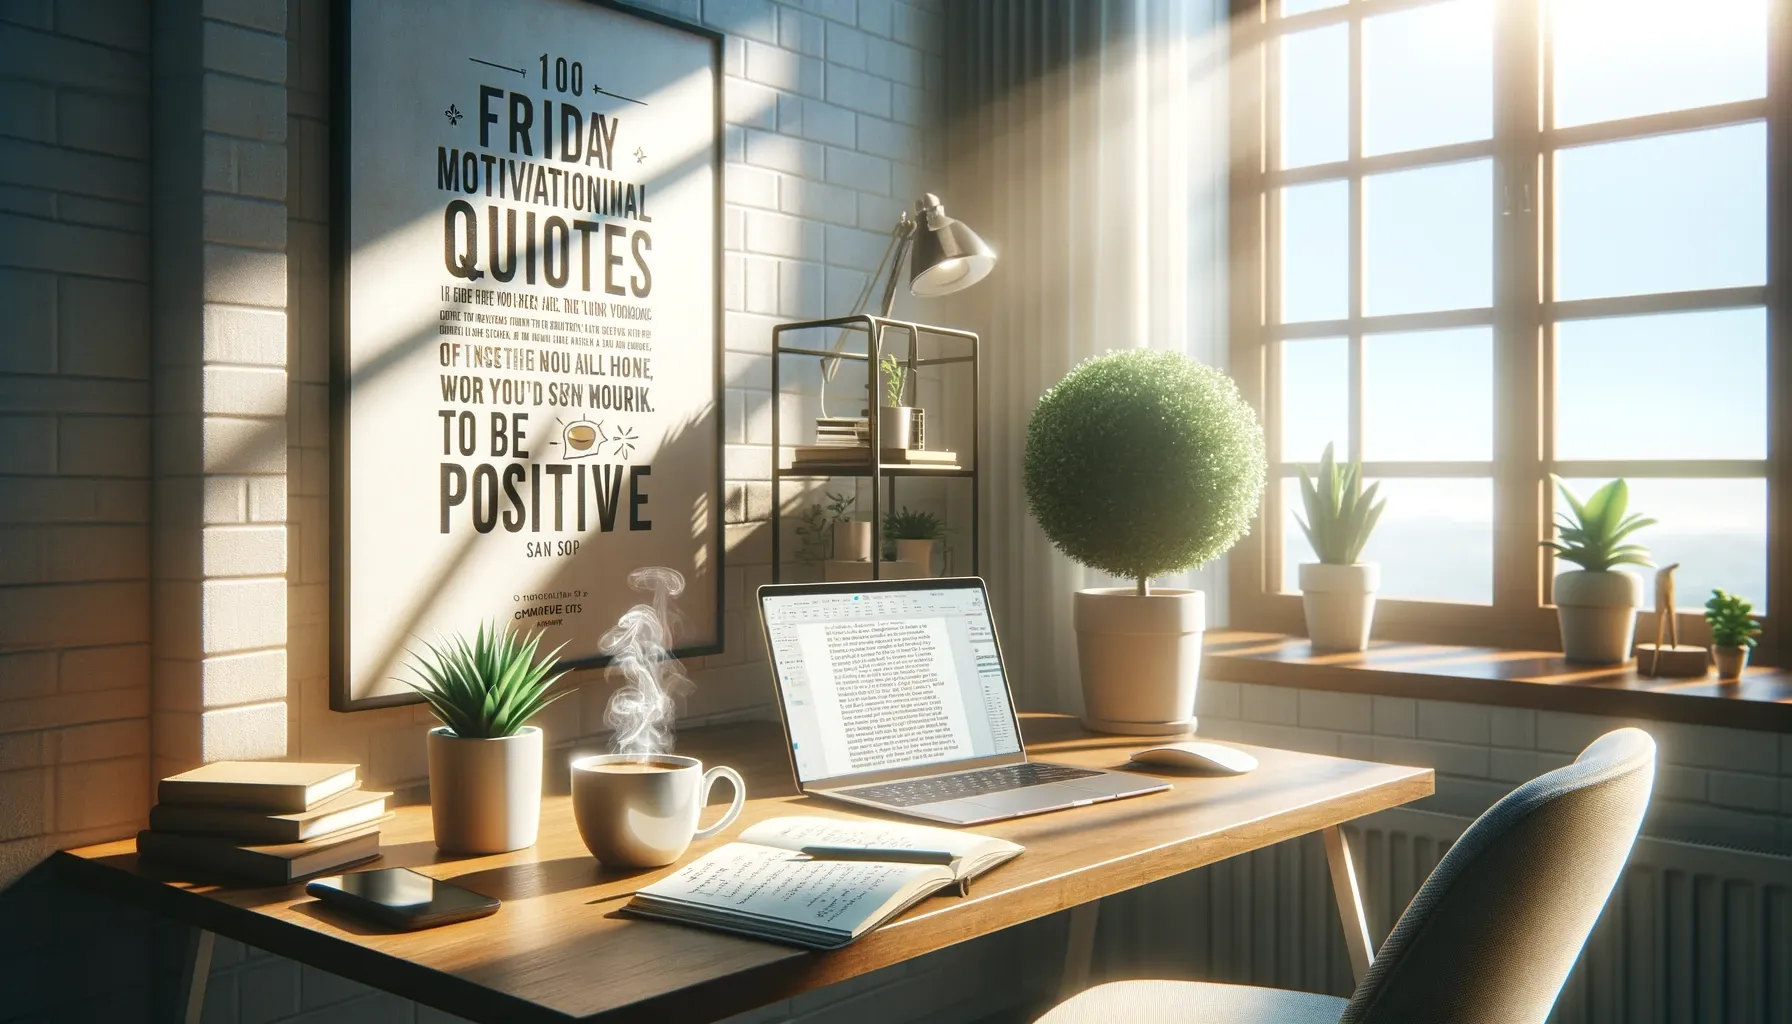 100+ Friday Motivational Quotes for Work to Be Positive